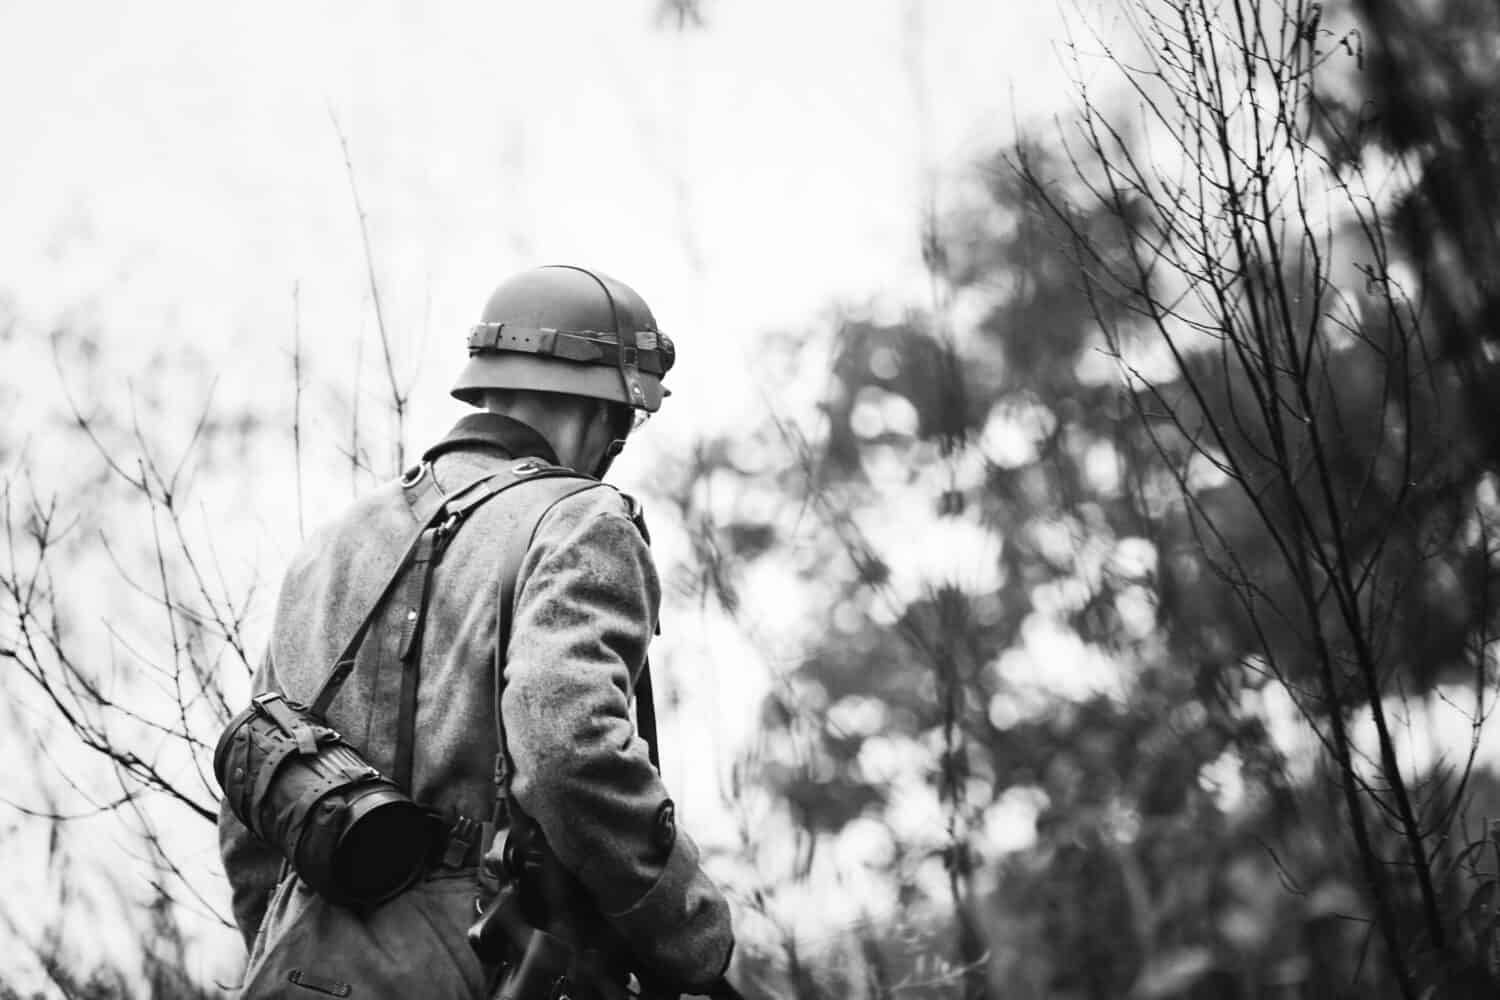 Close Up Single Re-enactor Dressed As German Wehrmacht Infantry Soldier In World War II Walking In Patrol Through Autumn Forest. WWII WW2 Times. Photo In Black And White Colors.